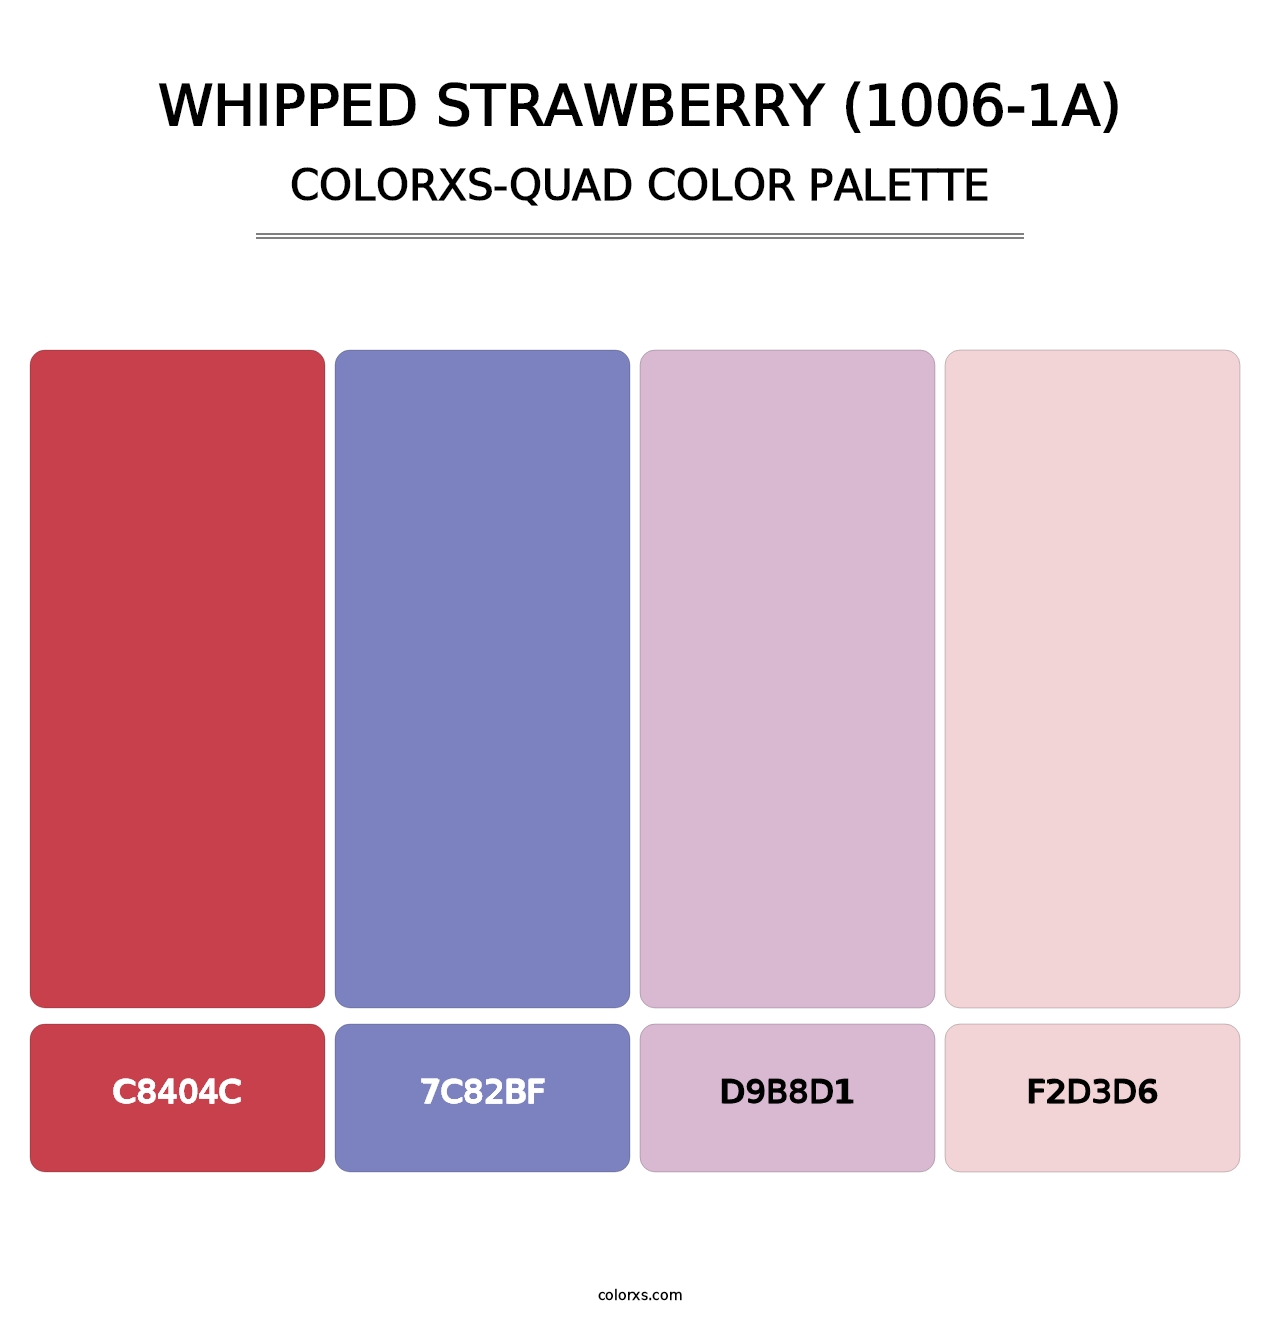 Whipped Strawberry (1006-1A) - Colorxs Quad Palette